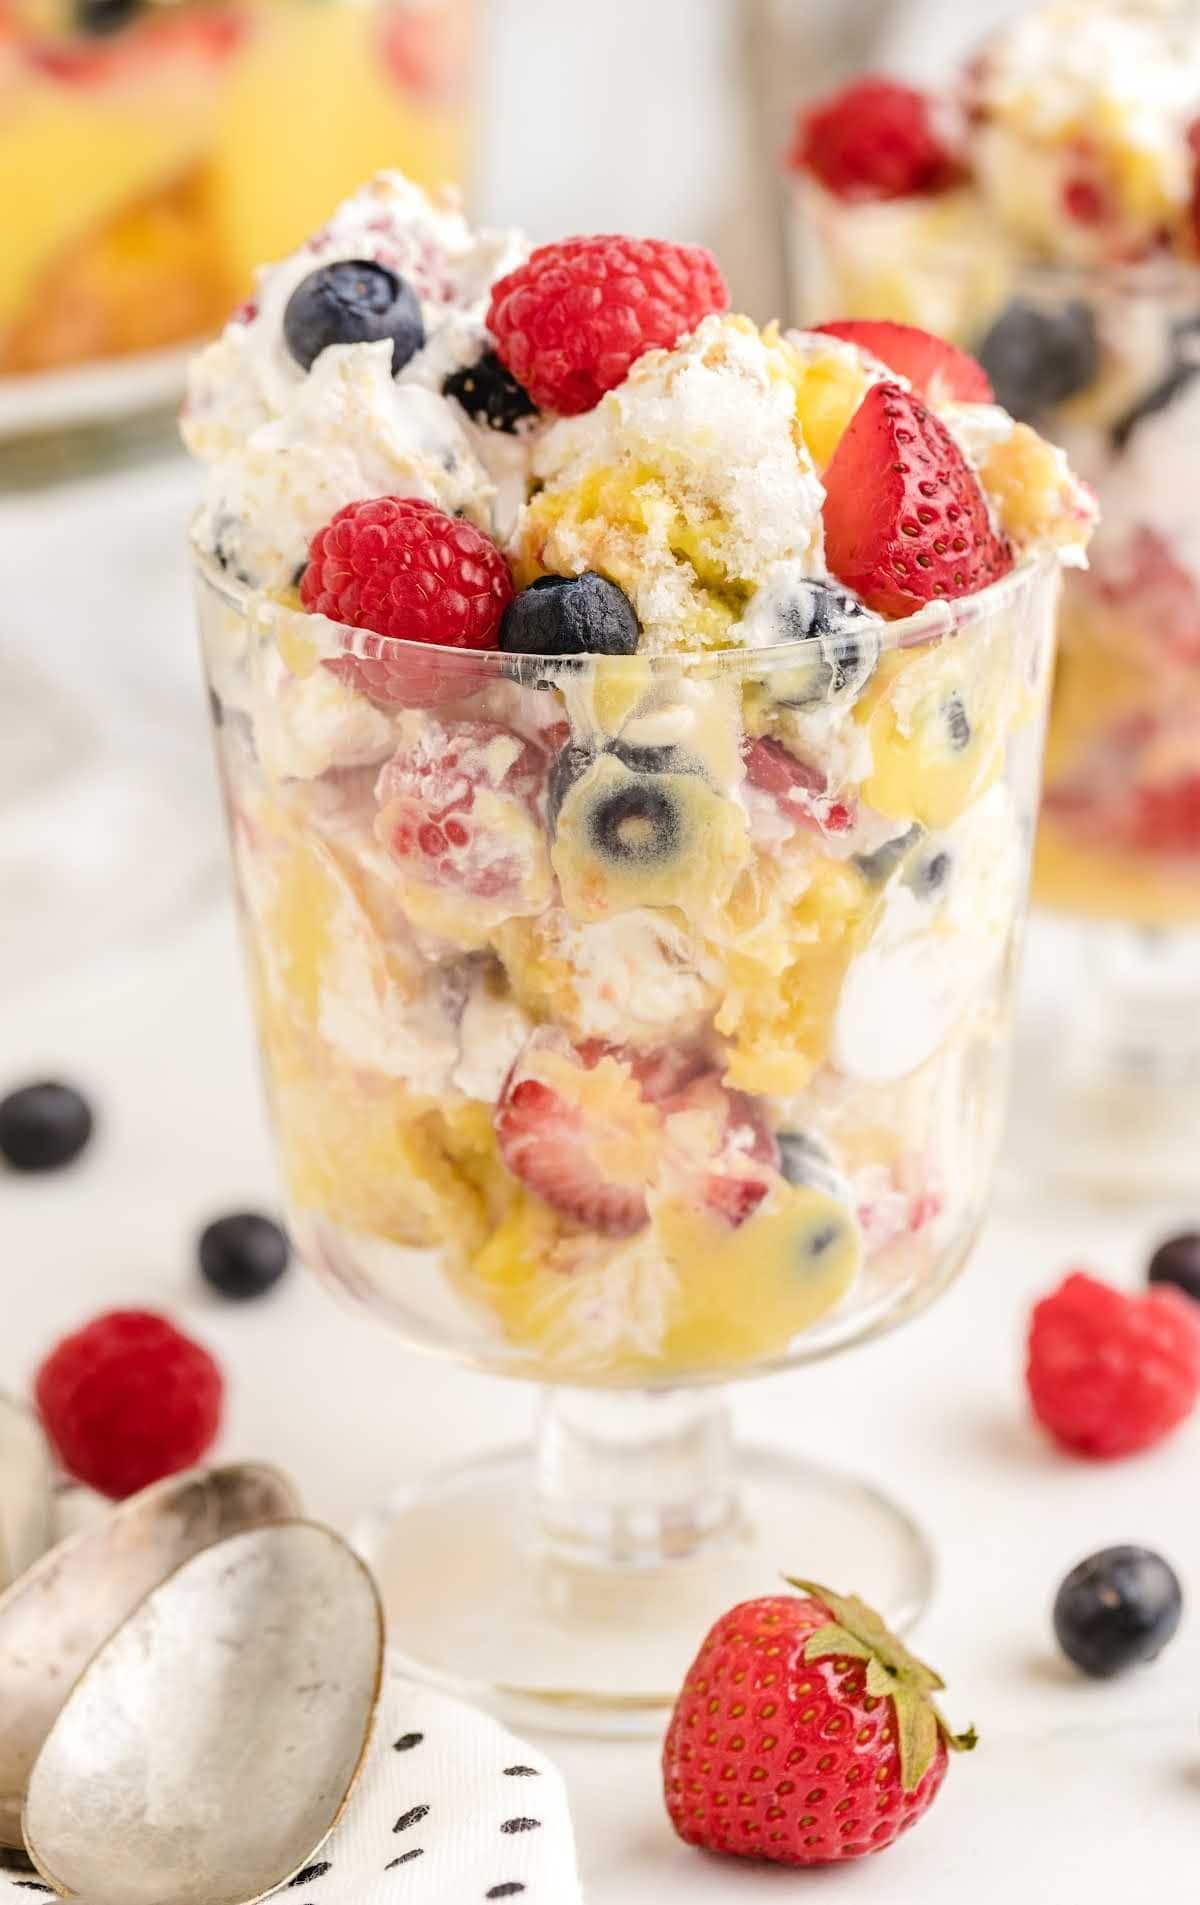 Berry trifle made from layers of fluffy angel food cake, French vanilla pudding mix, and fresh berries.